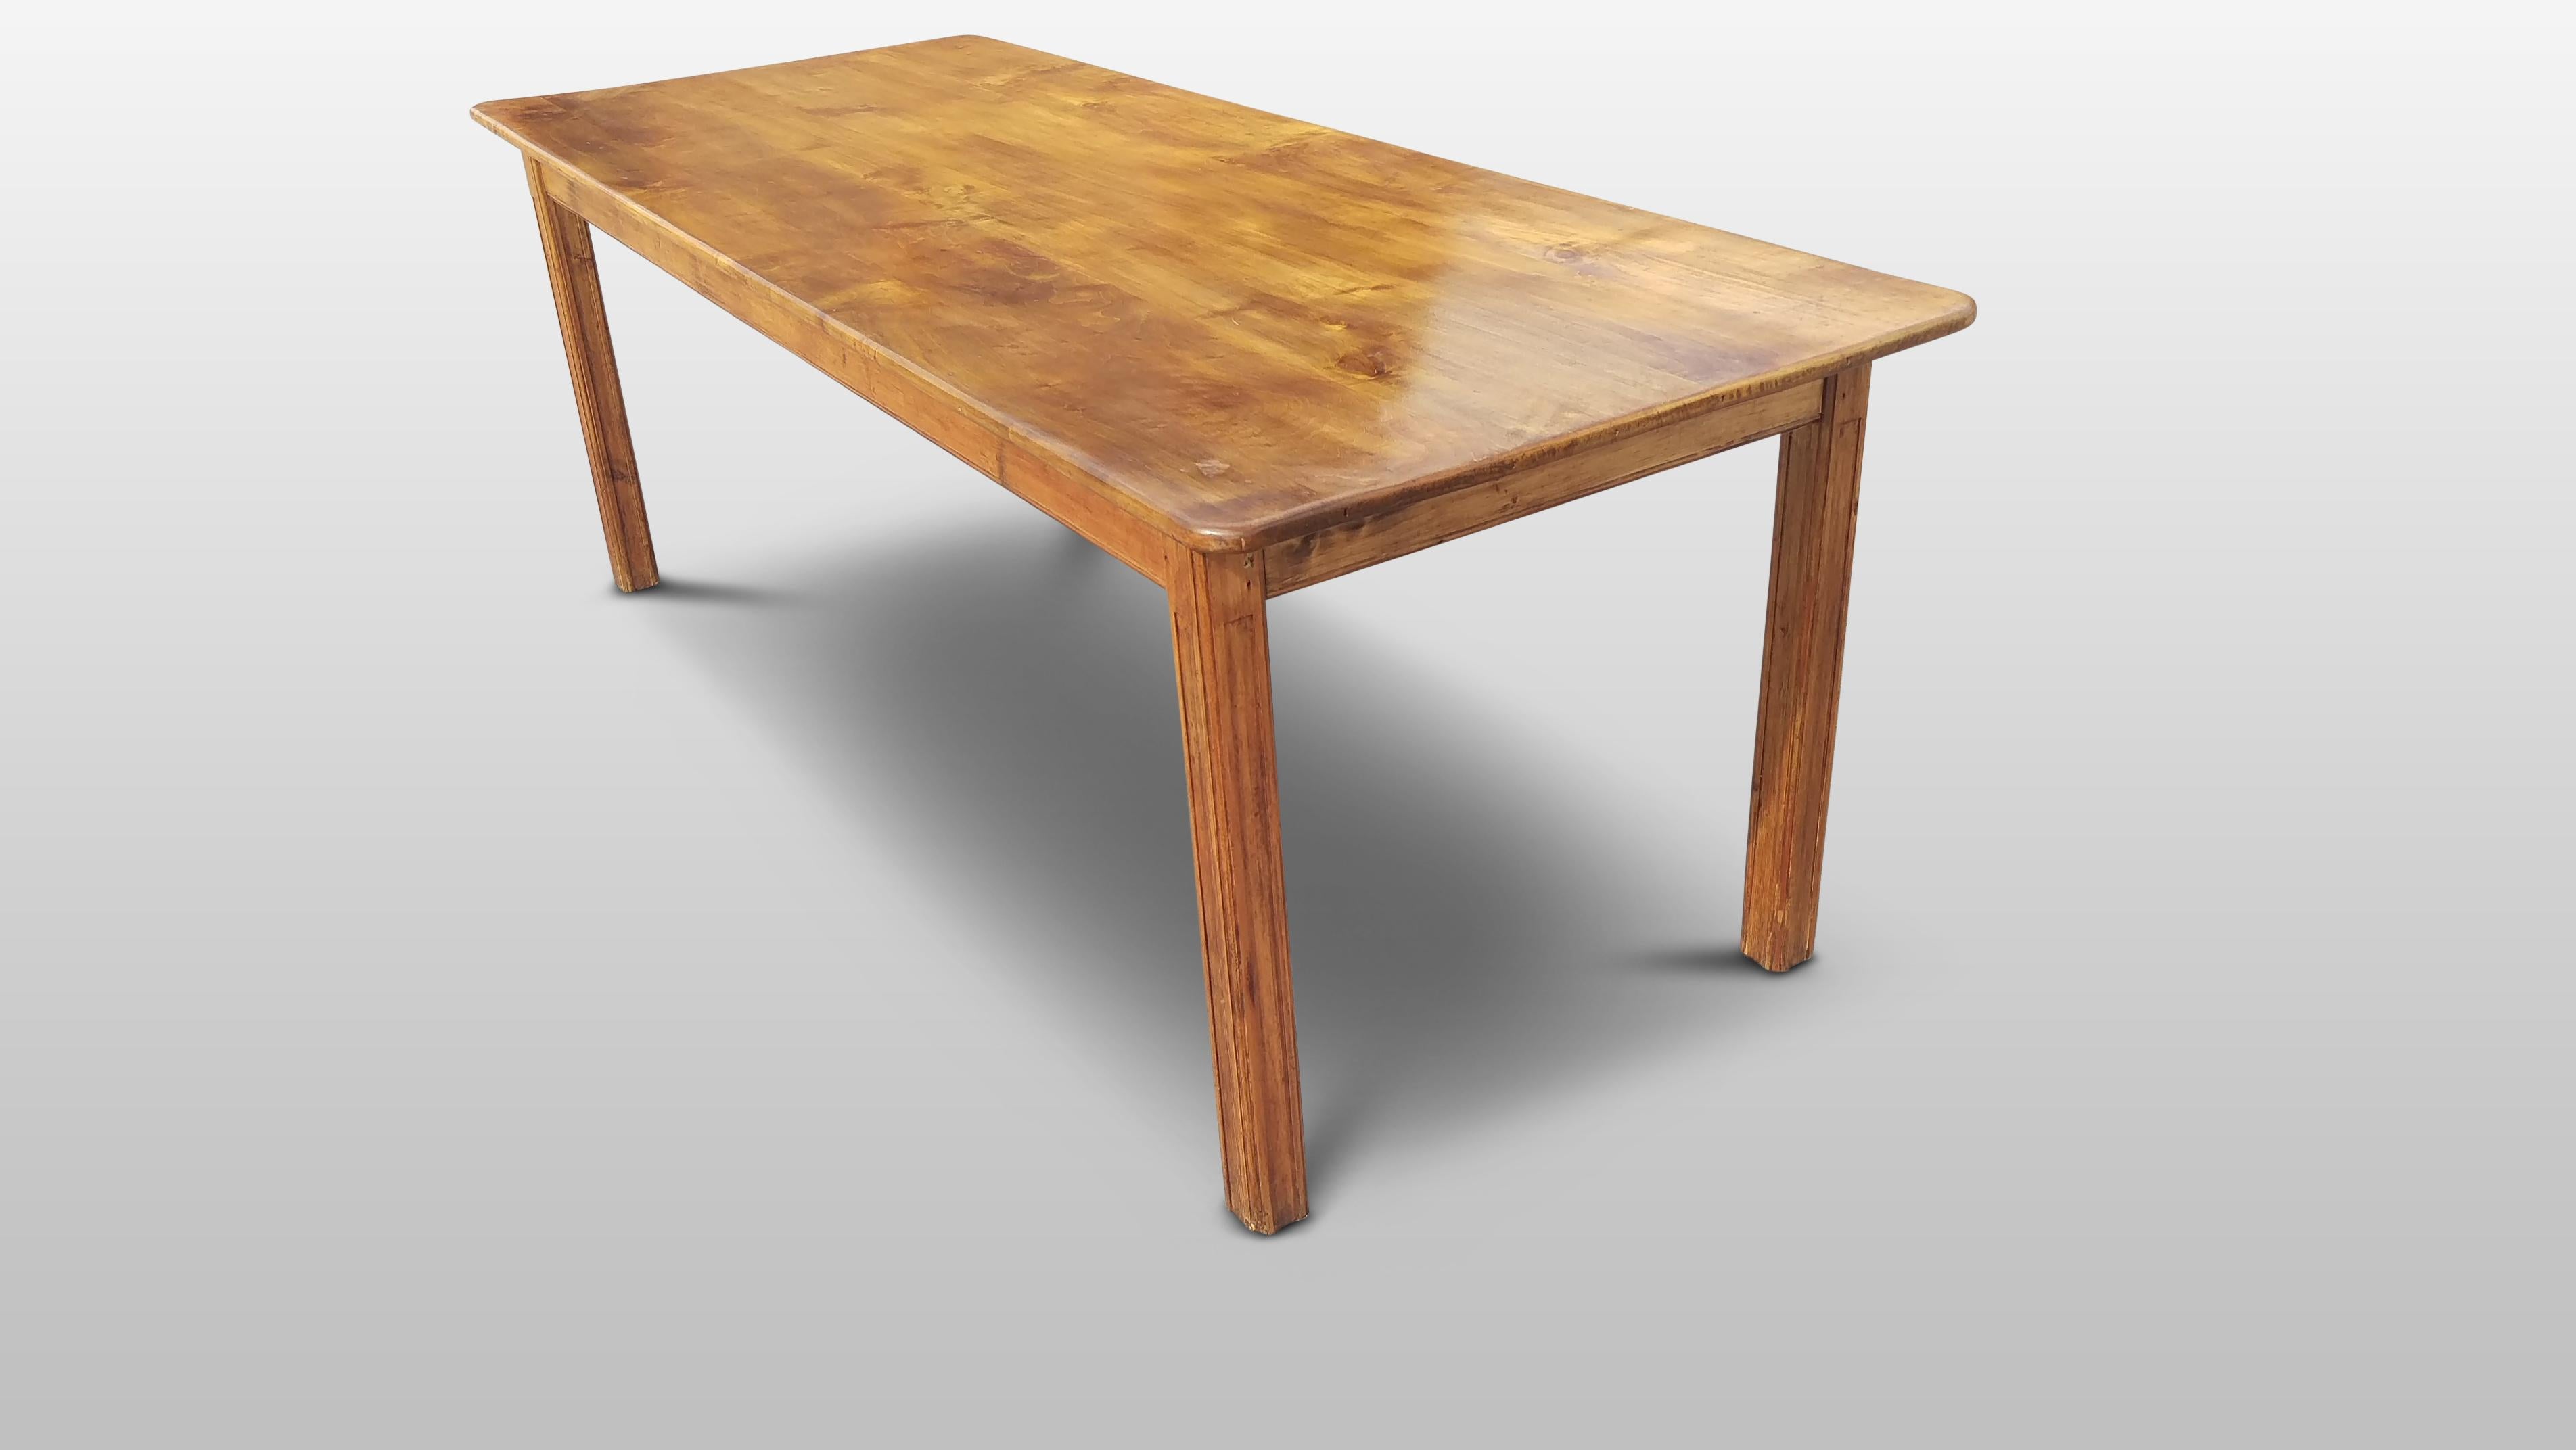 Good quality French Farmhouse dining table from the early circa 1900s
This delightful table is a useful size with plenty of leg room and enough space to seat 8 to 10 people.
The table has plain square legs and a good size top with an attractive